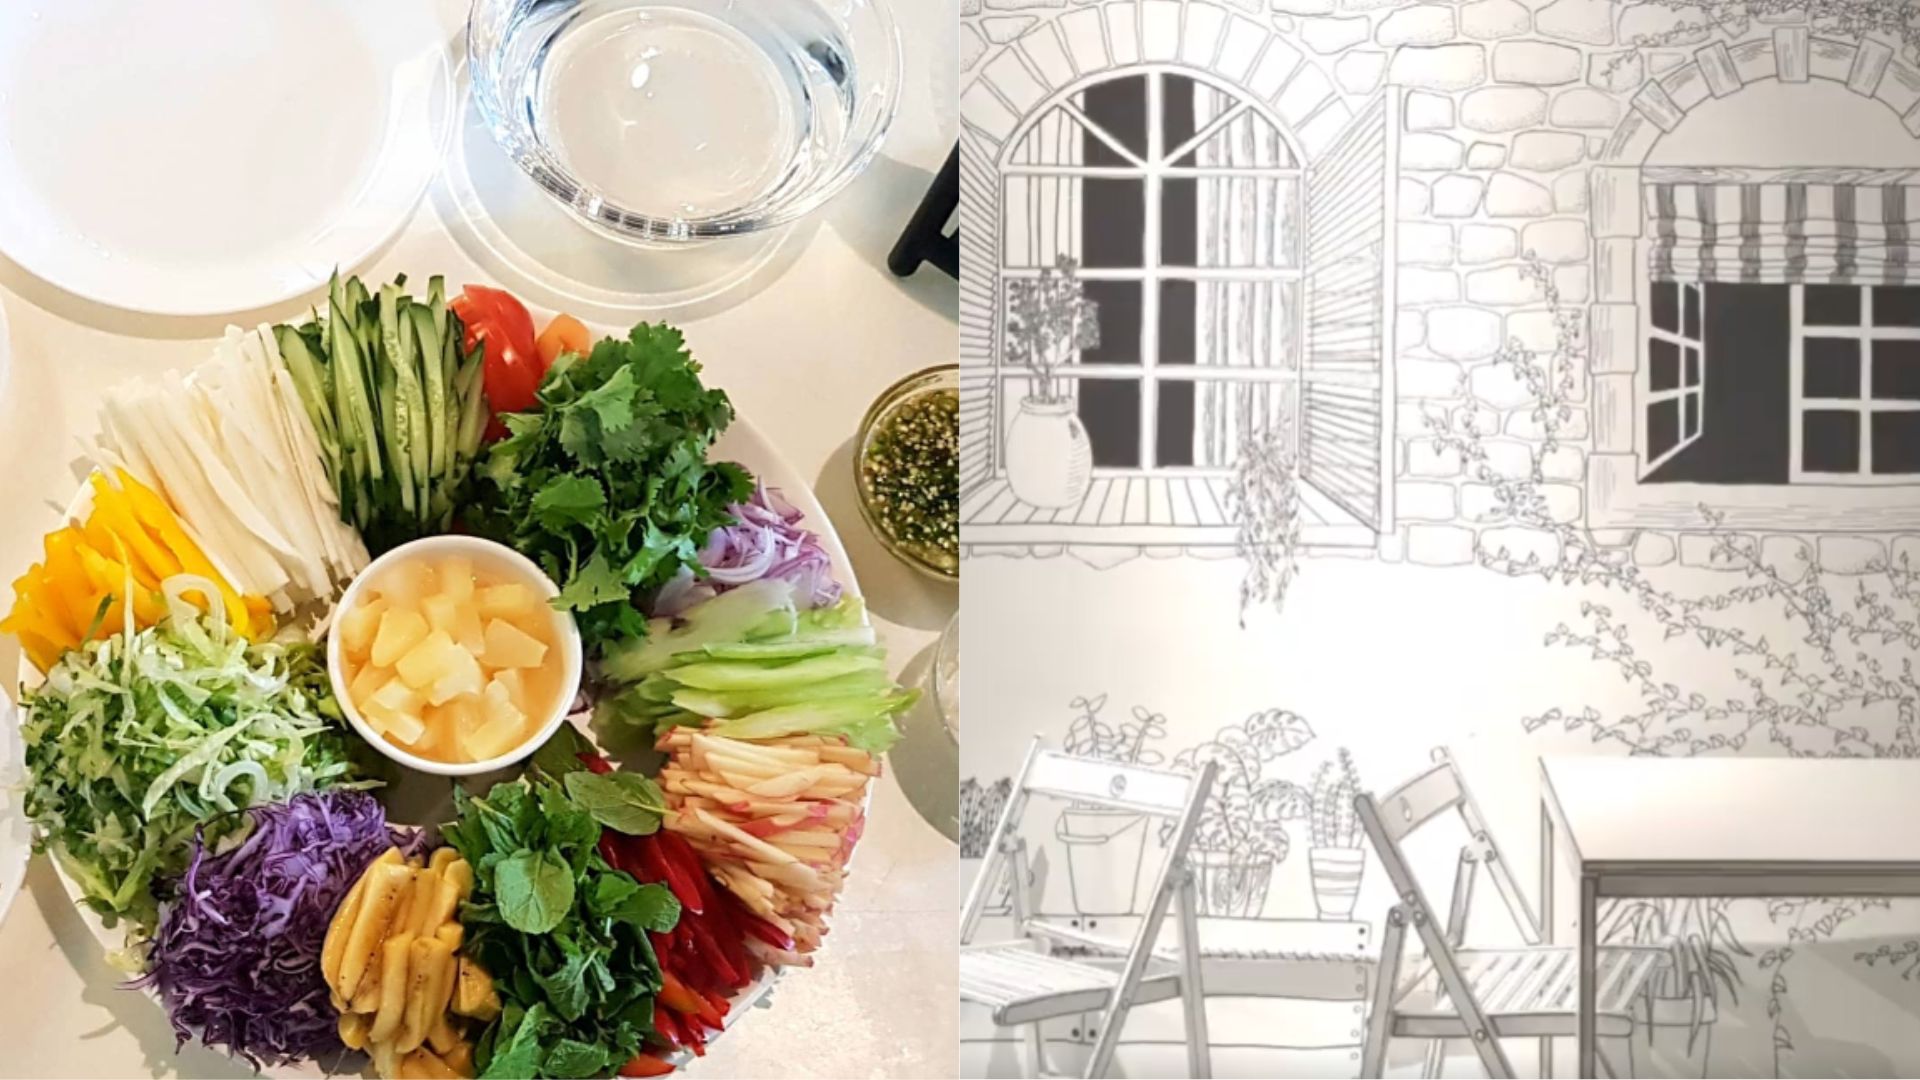 Enjoy Your Time in Arete Cafe: Foods And Art For Seoul